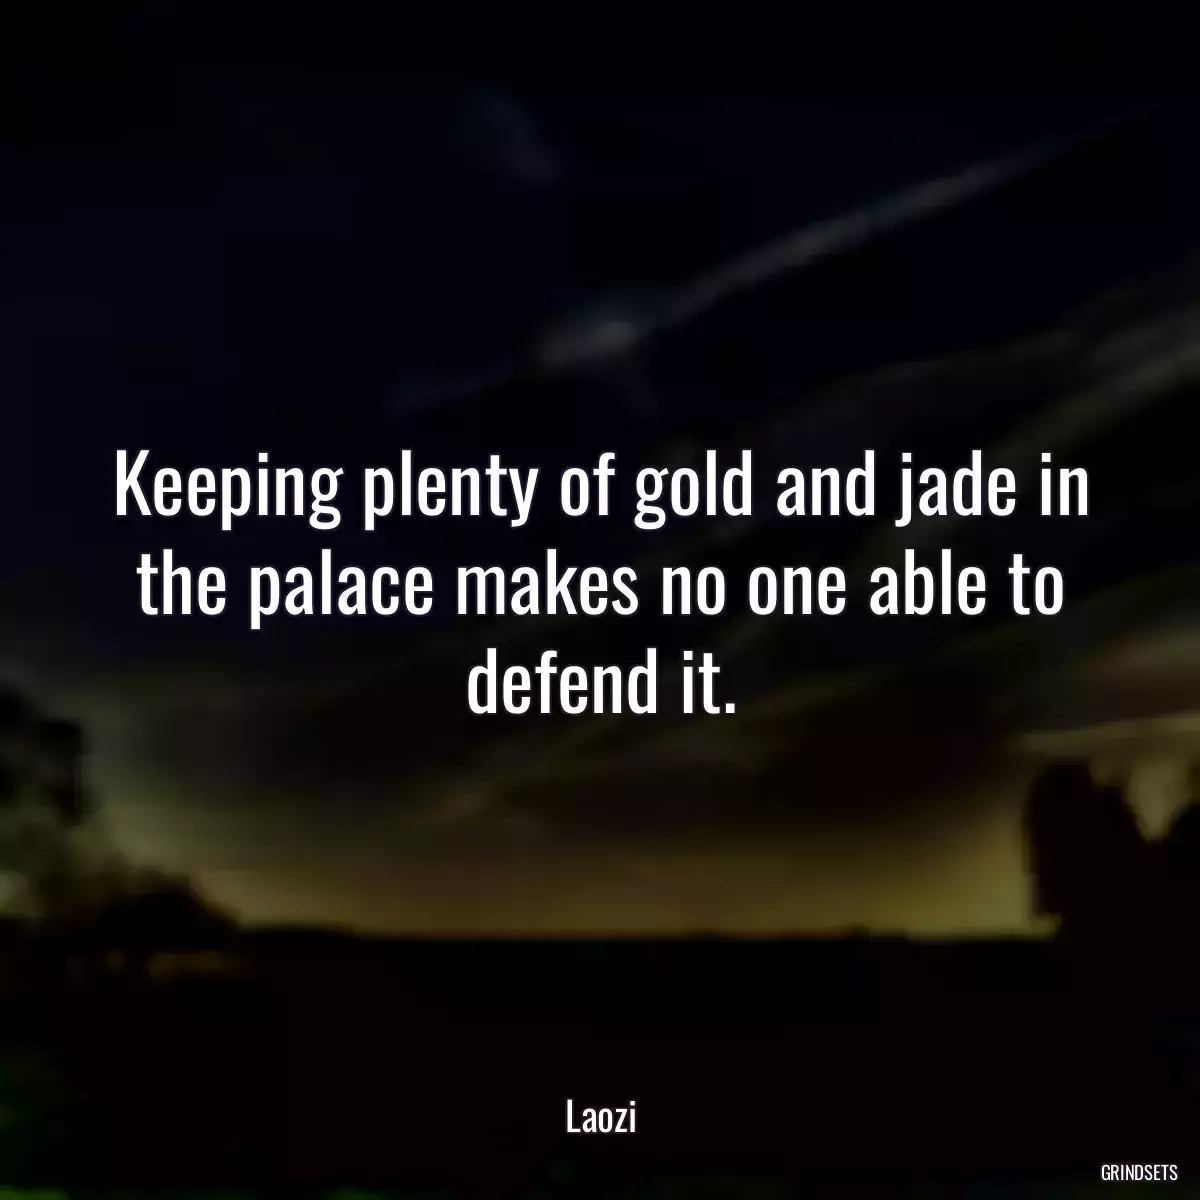 Keeping plenty of gold and jade in the palace makes no one able to defend it.